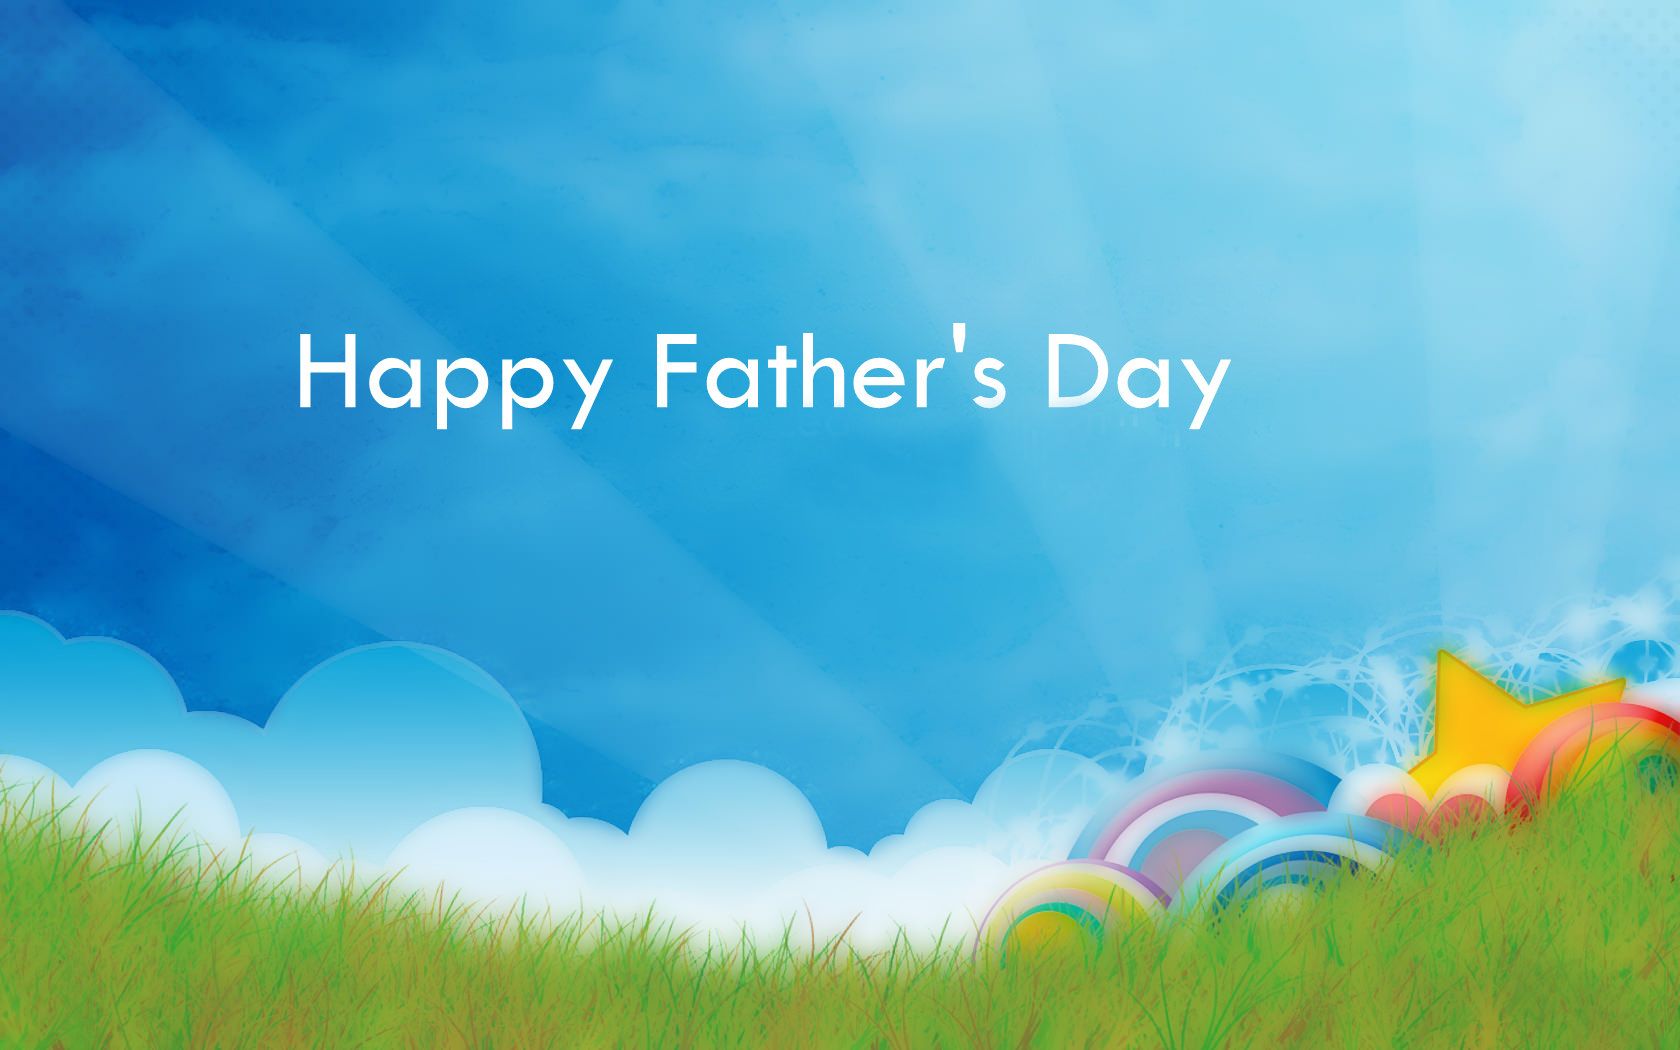 Happy father's day wallpaper. Happy Father's Day 2016 Quotes